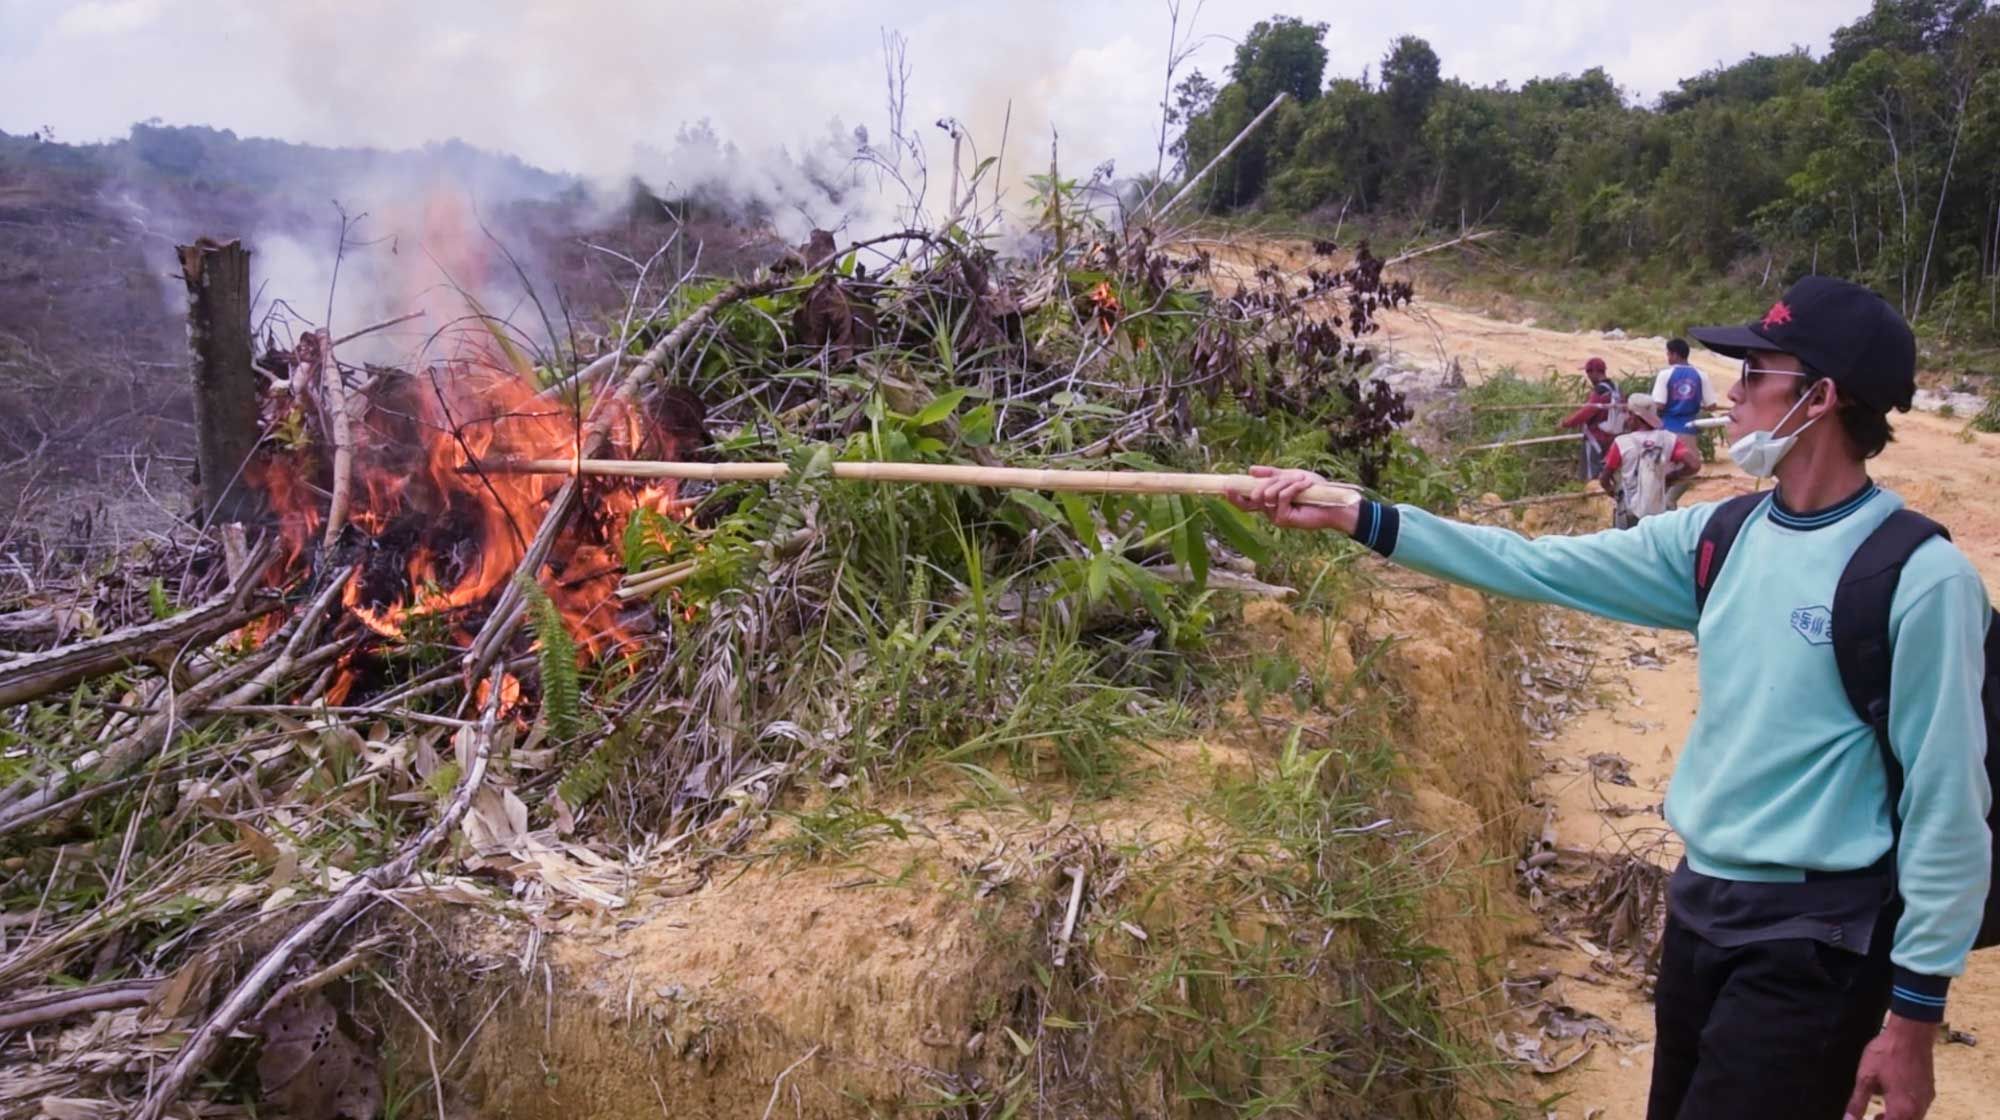 Dayak villagers of Bangsal Behe begin a planned burn on a 5 hectare patch of prepared forest